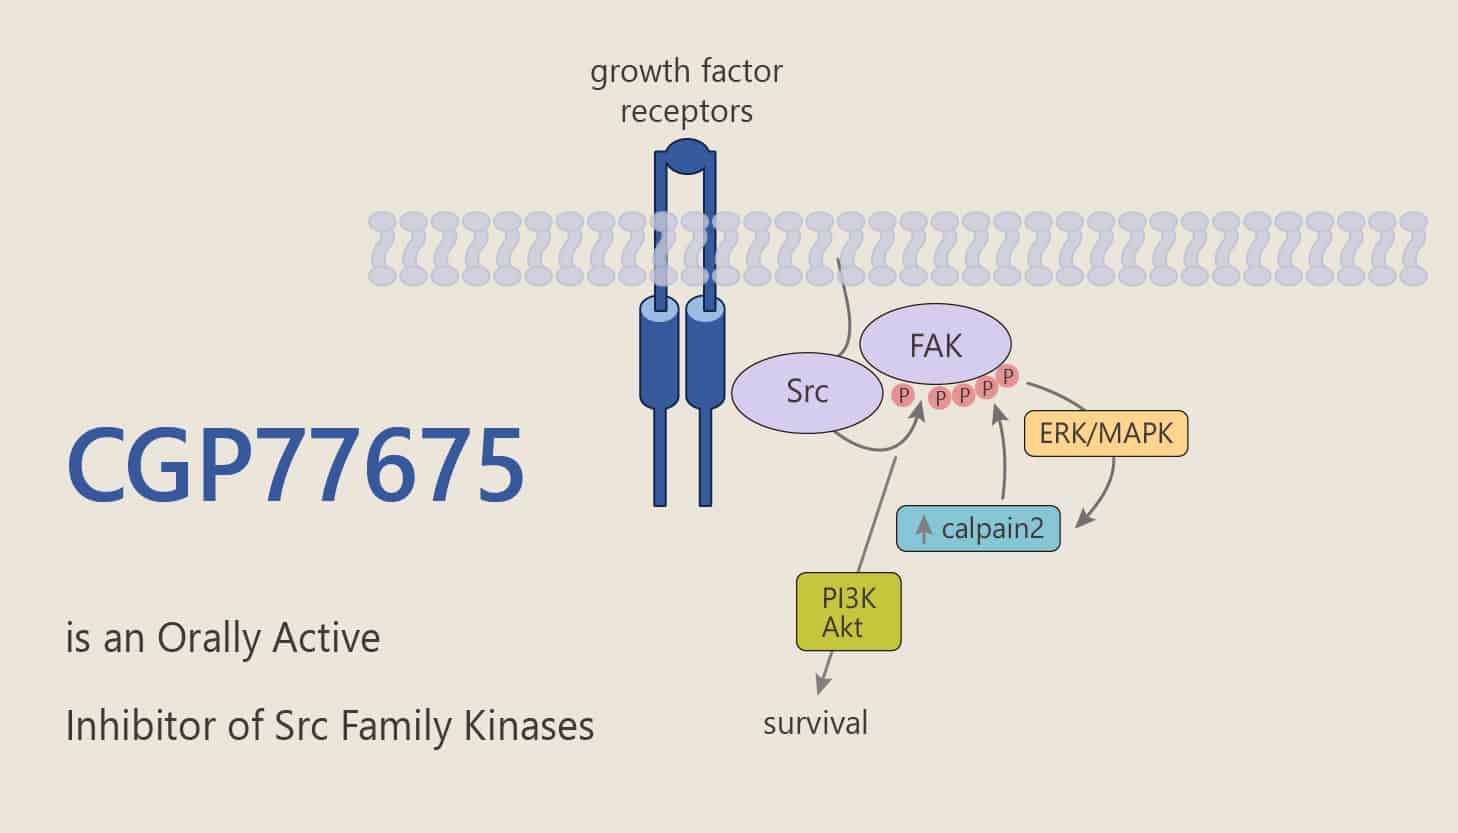 CGP77675 is an Orally Active Inhibitor of Src Family Kinases